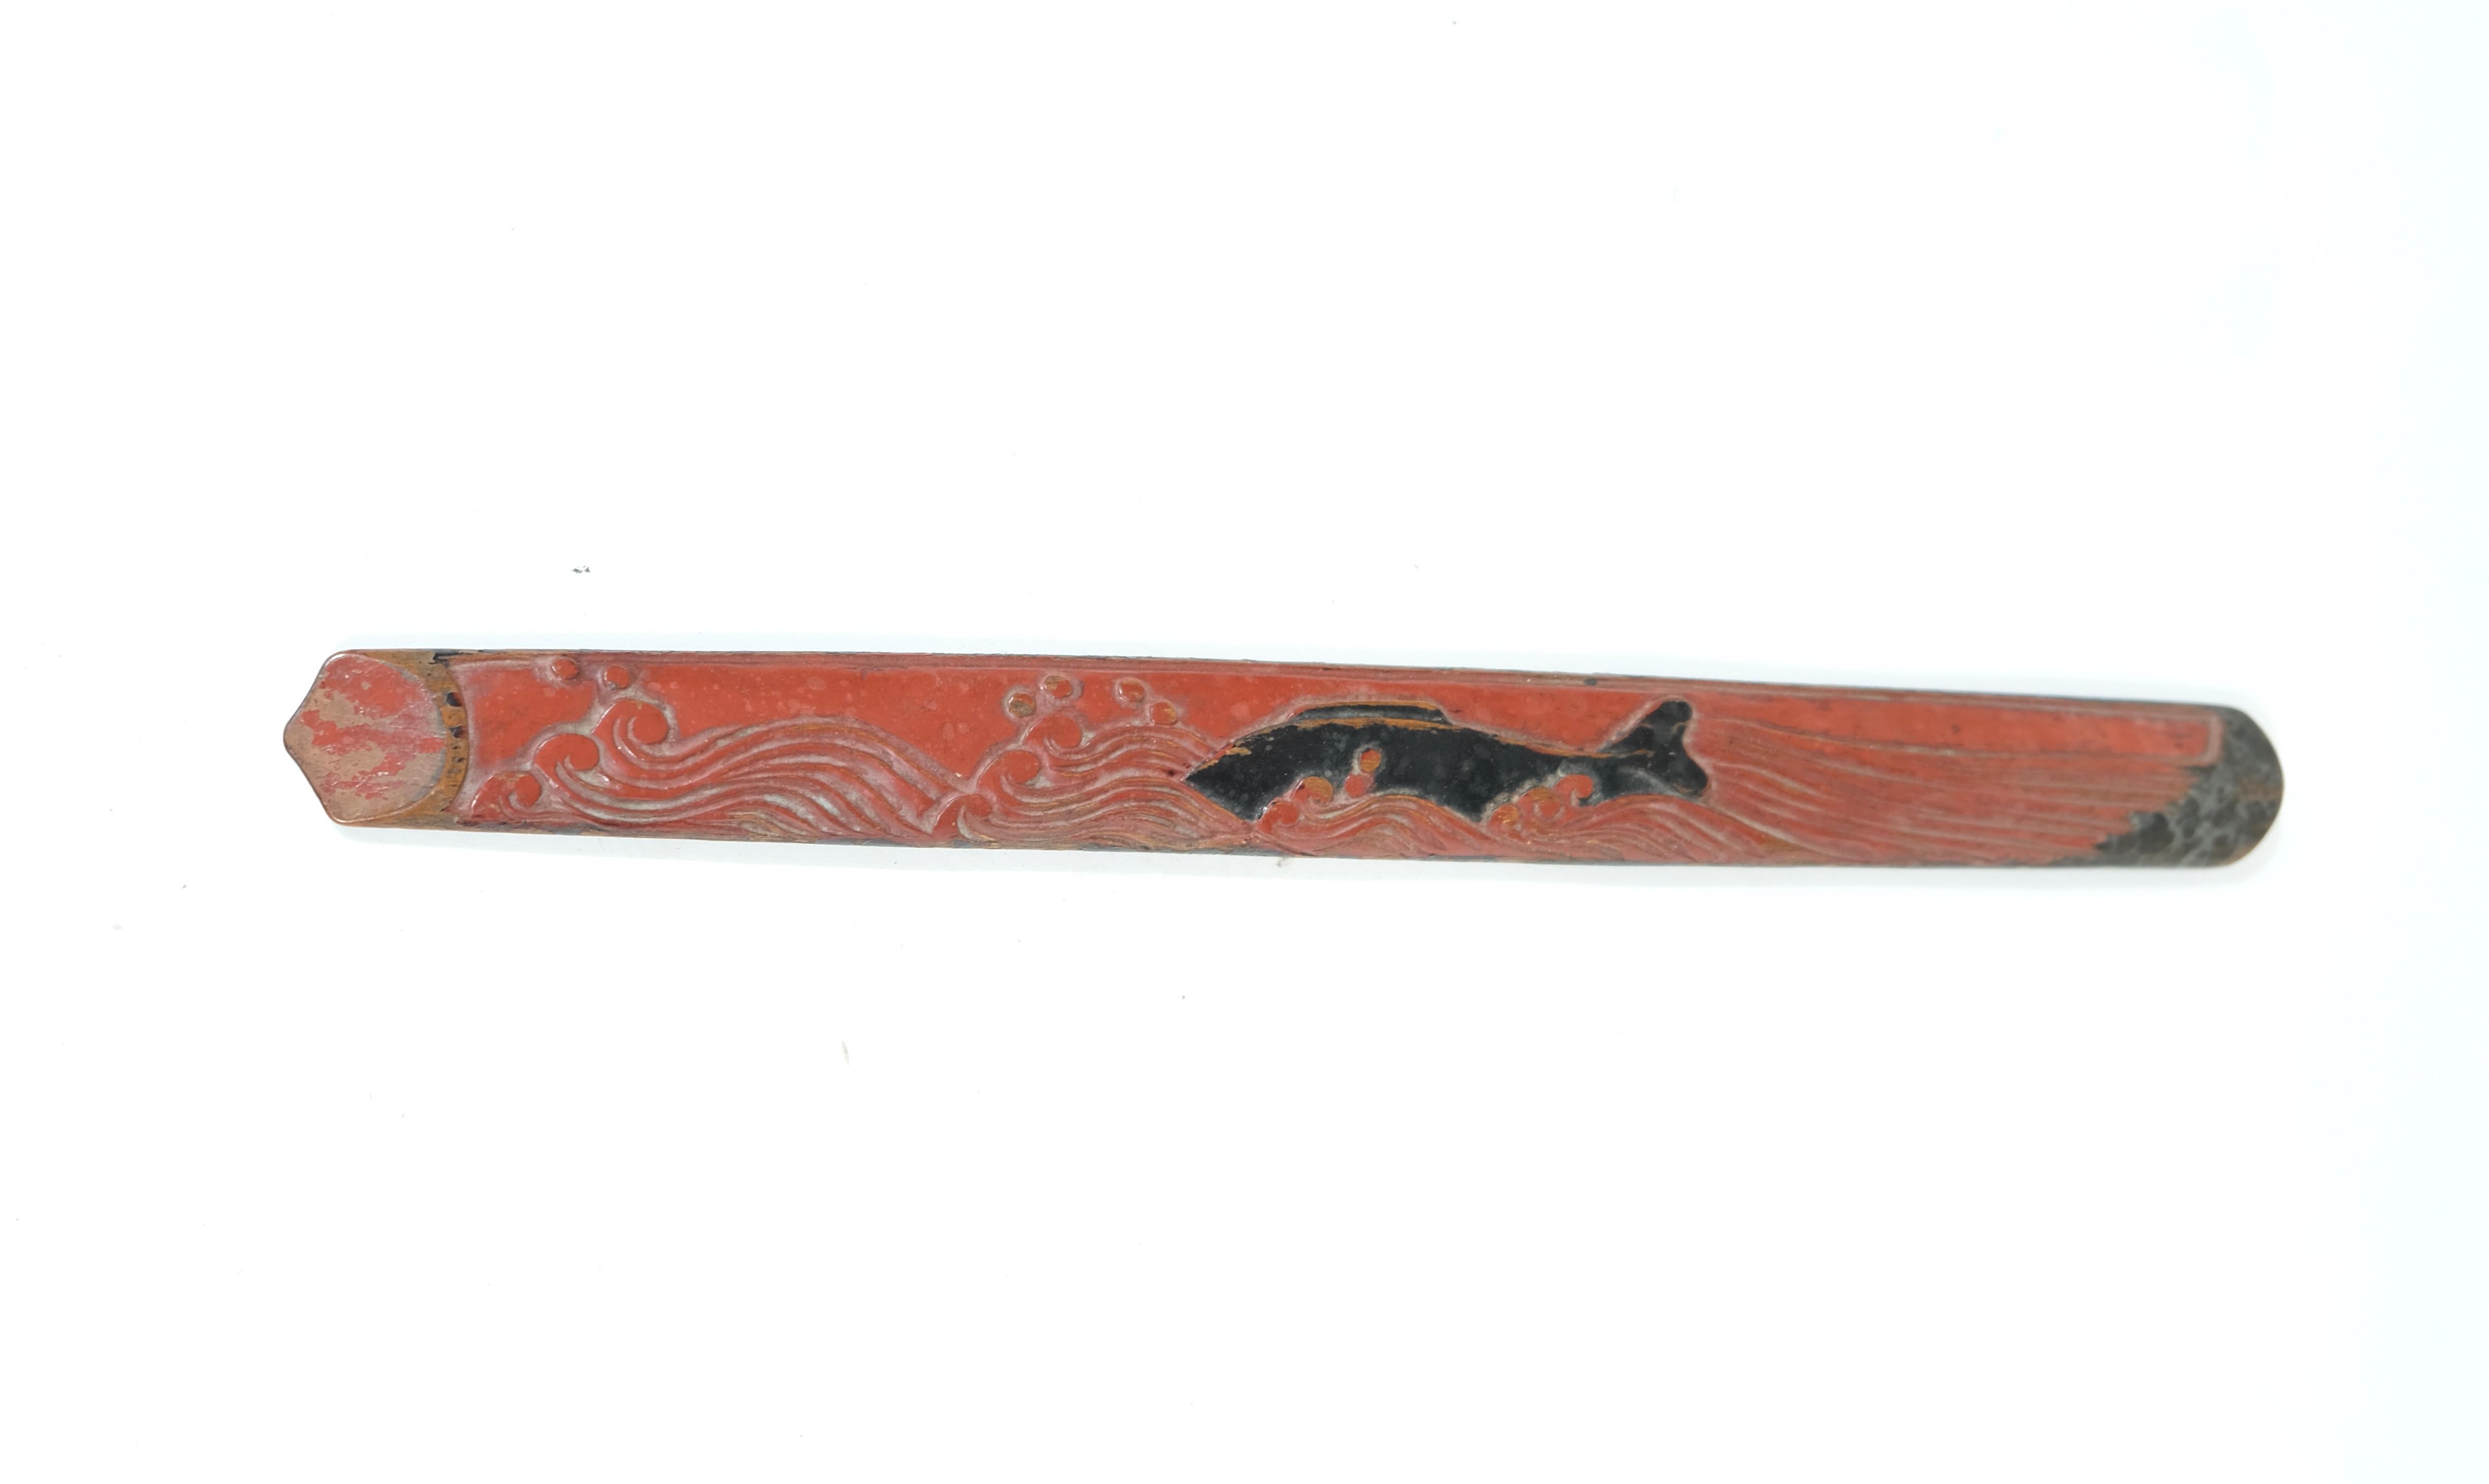 Japanese Ikupasuy, Wooden Carved Ceremonial Stick Used by Ainu Men When Making Offeri